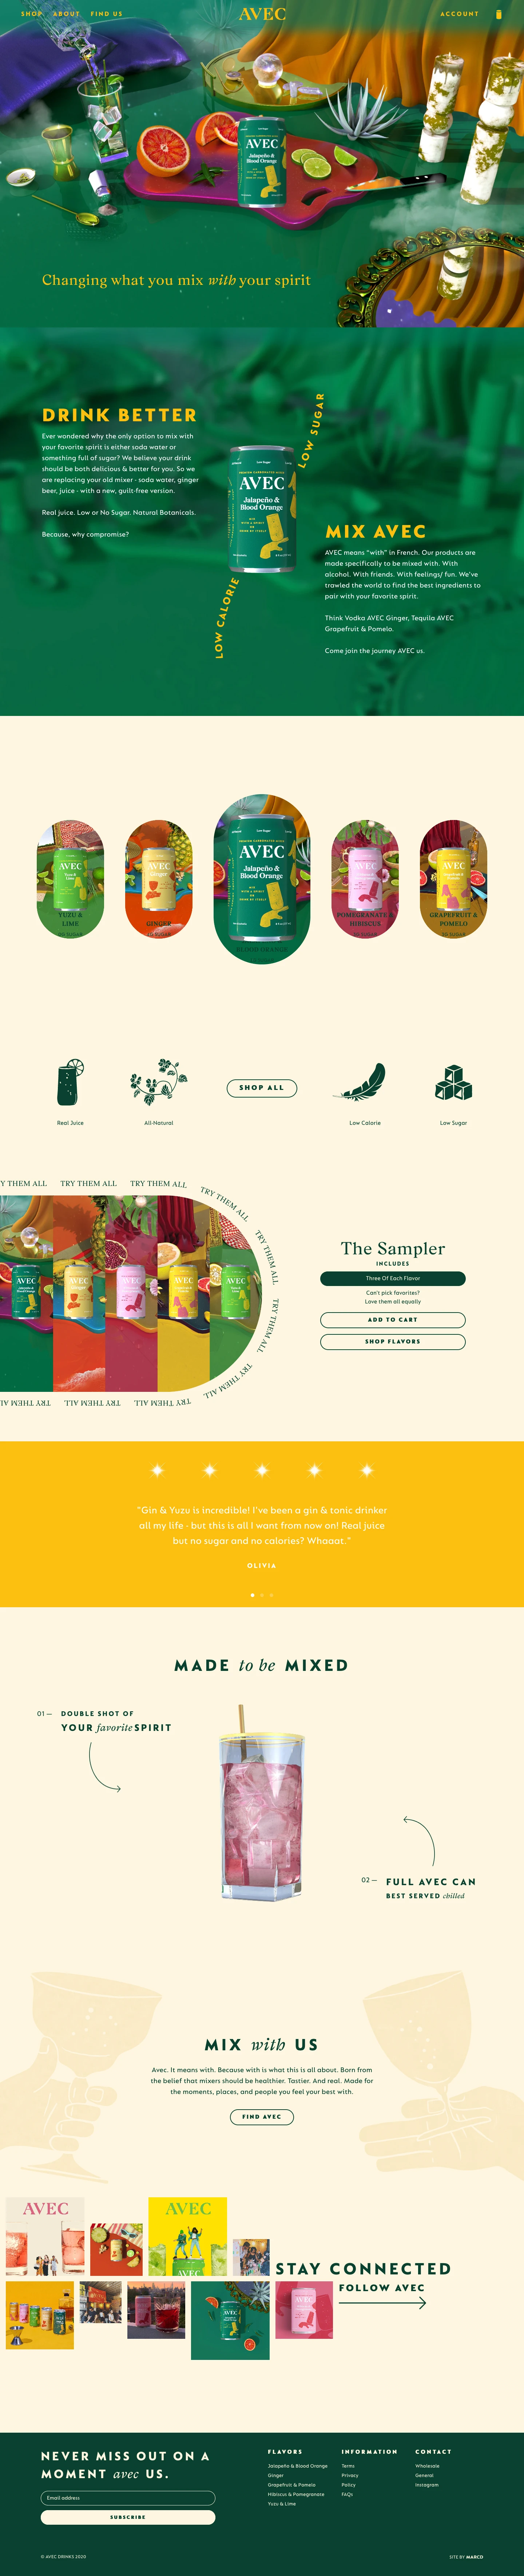 AVEC Drinks Landing Page Example: All Natural, Real Juice and Low in Sugar/Calories. Dont compromise what you mix with your spirit.